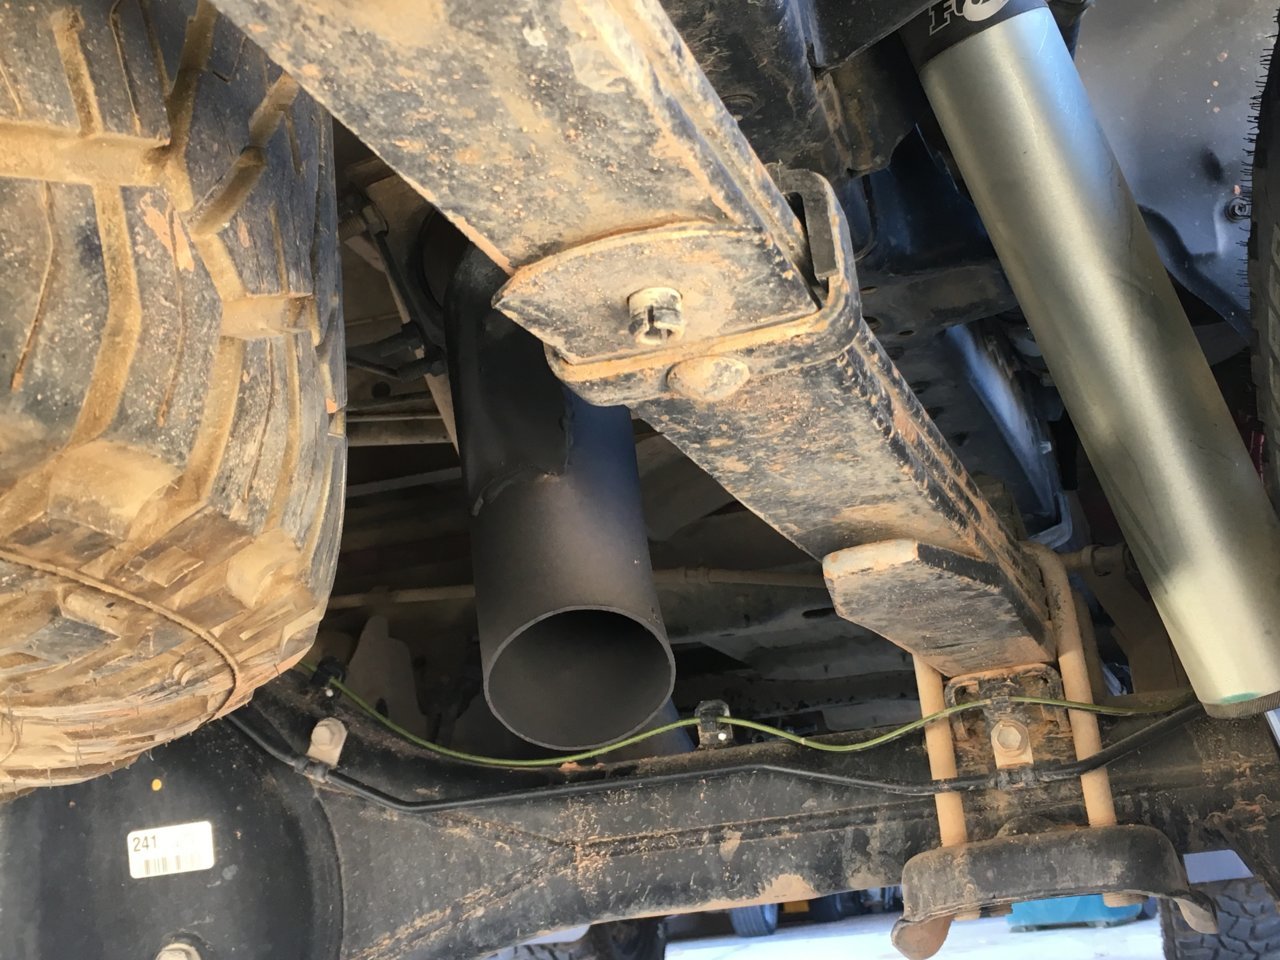 Exhaust dump before or after rear axle? | Toyota Tundra Forum